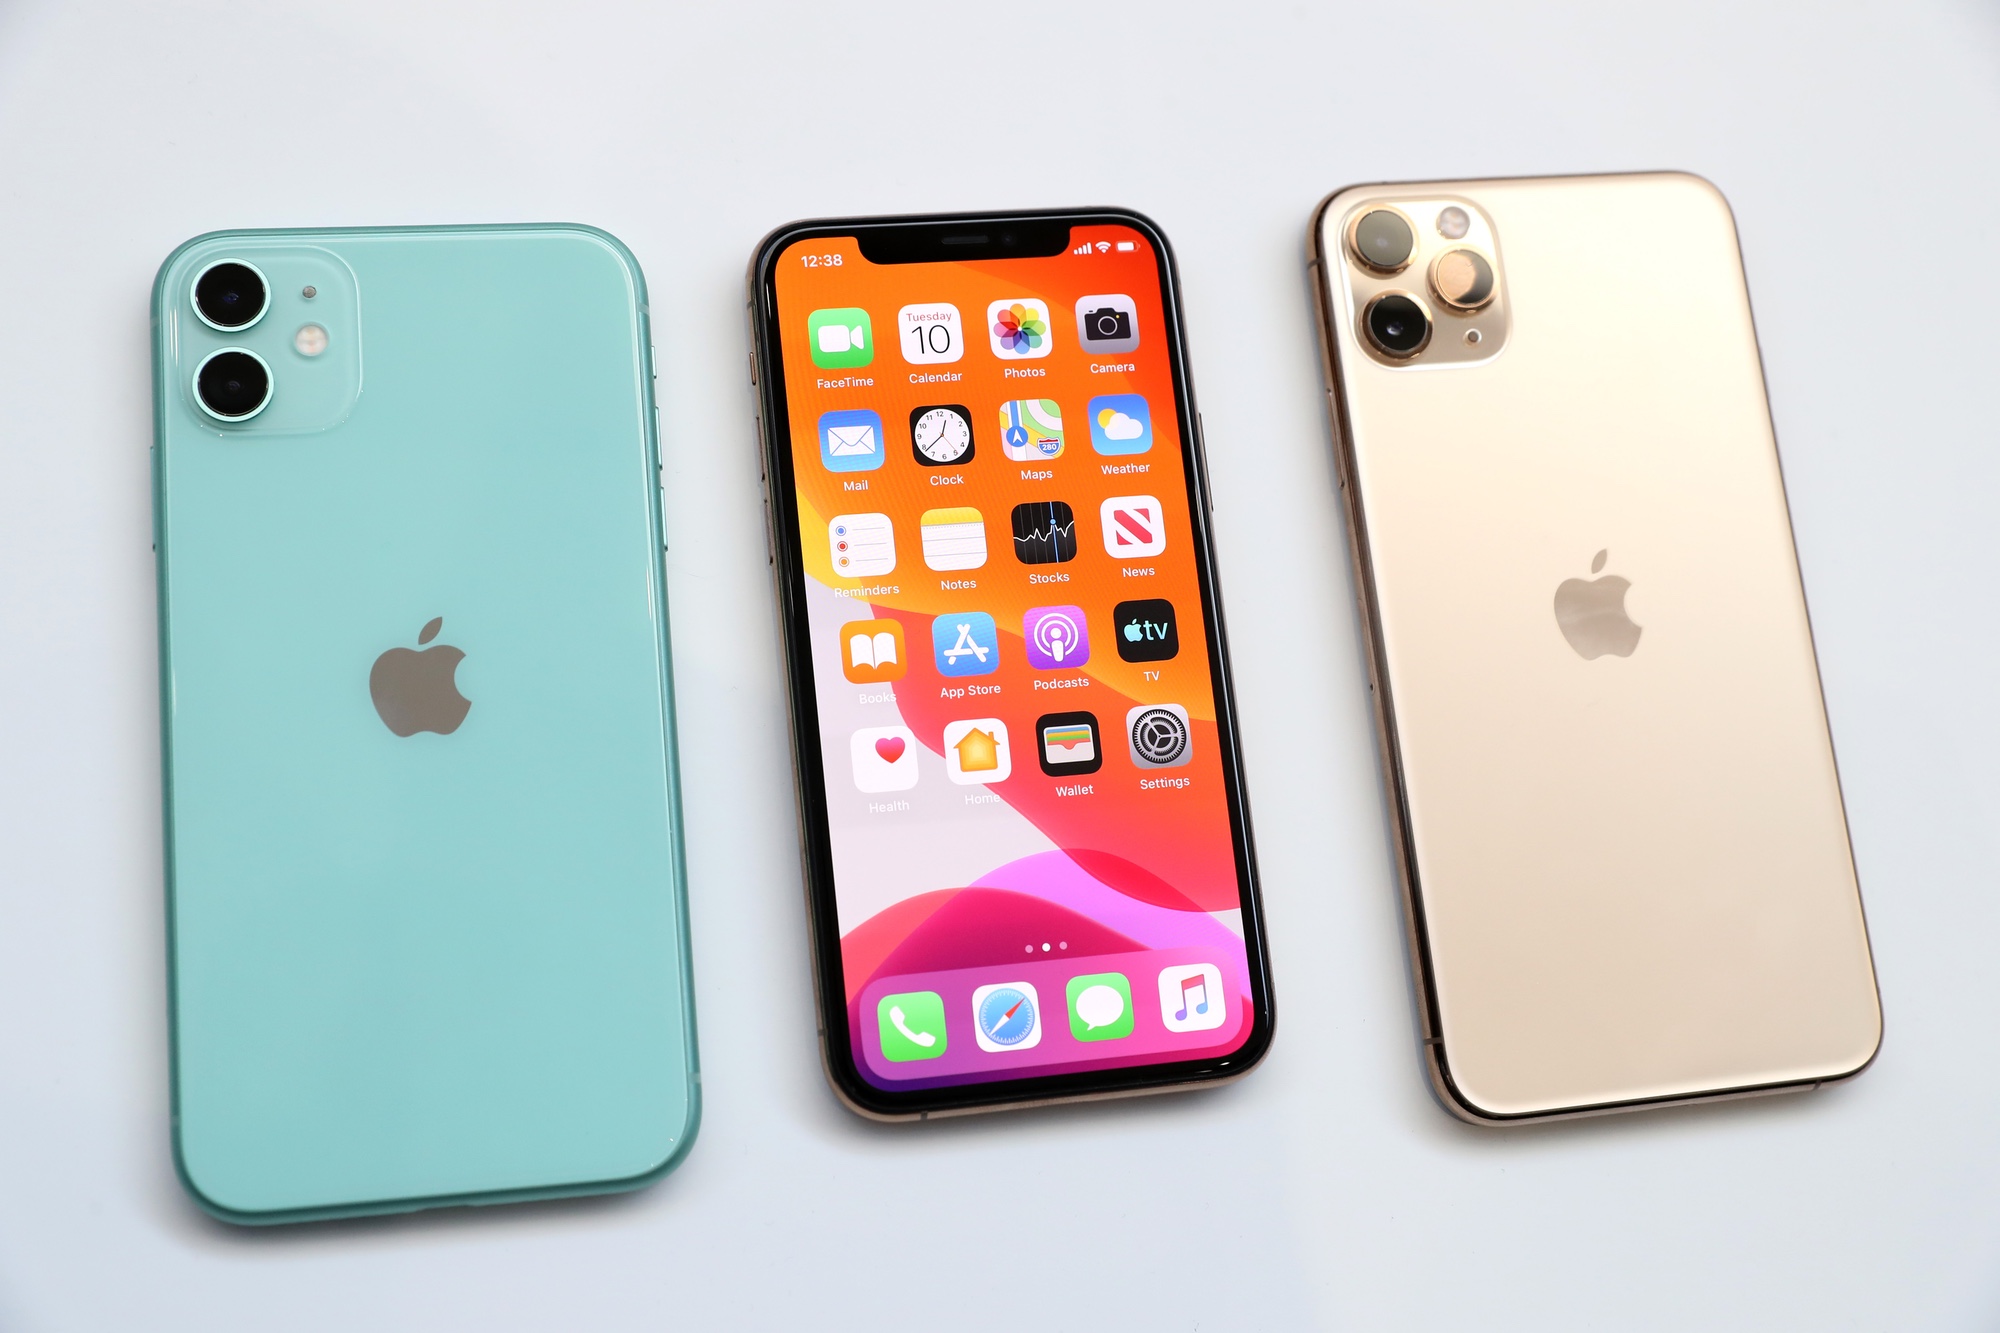 Iphone 11 Vs Iphone 11 Pro Vs Iphone 11 Pro Max Which Should